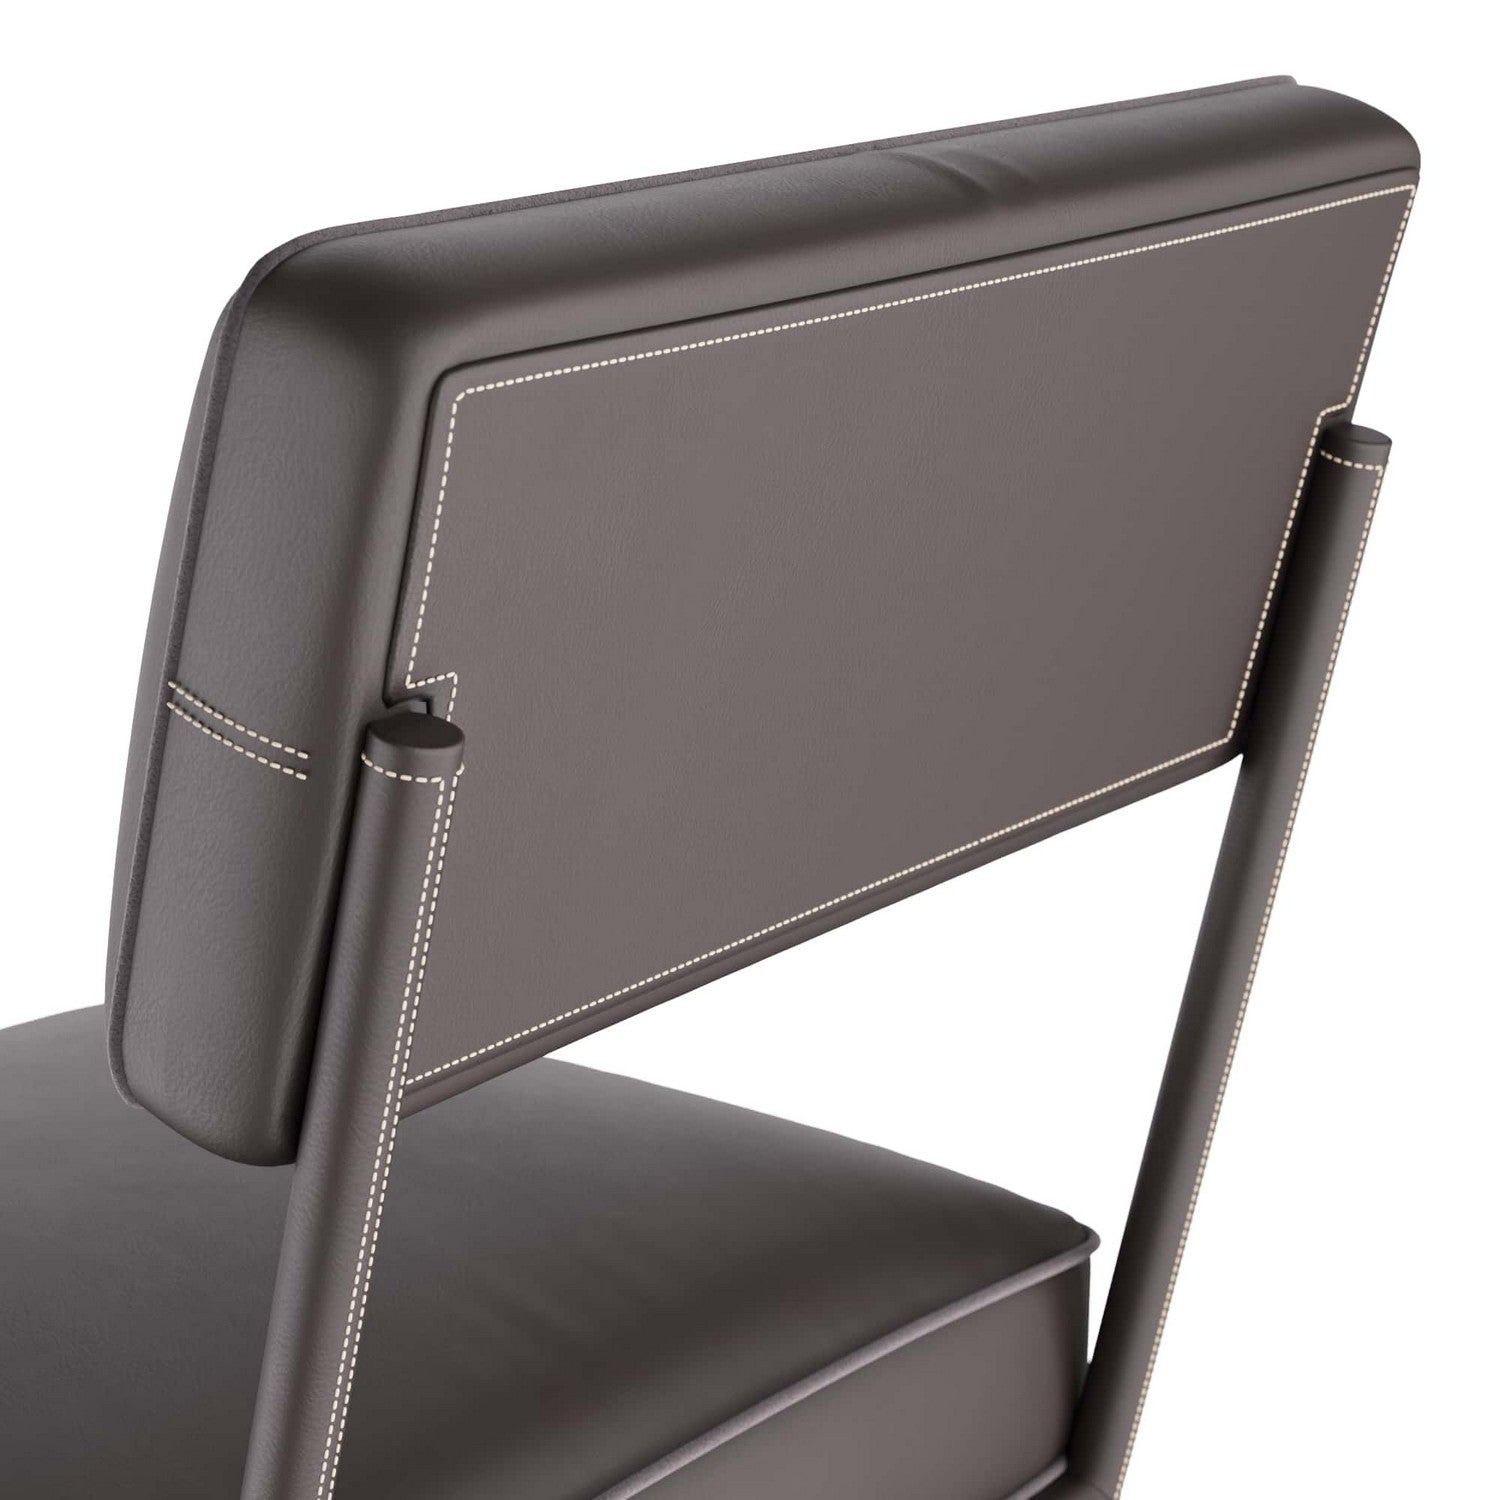 Dining Chair from the Topanga collection in Graphite finish